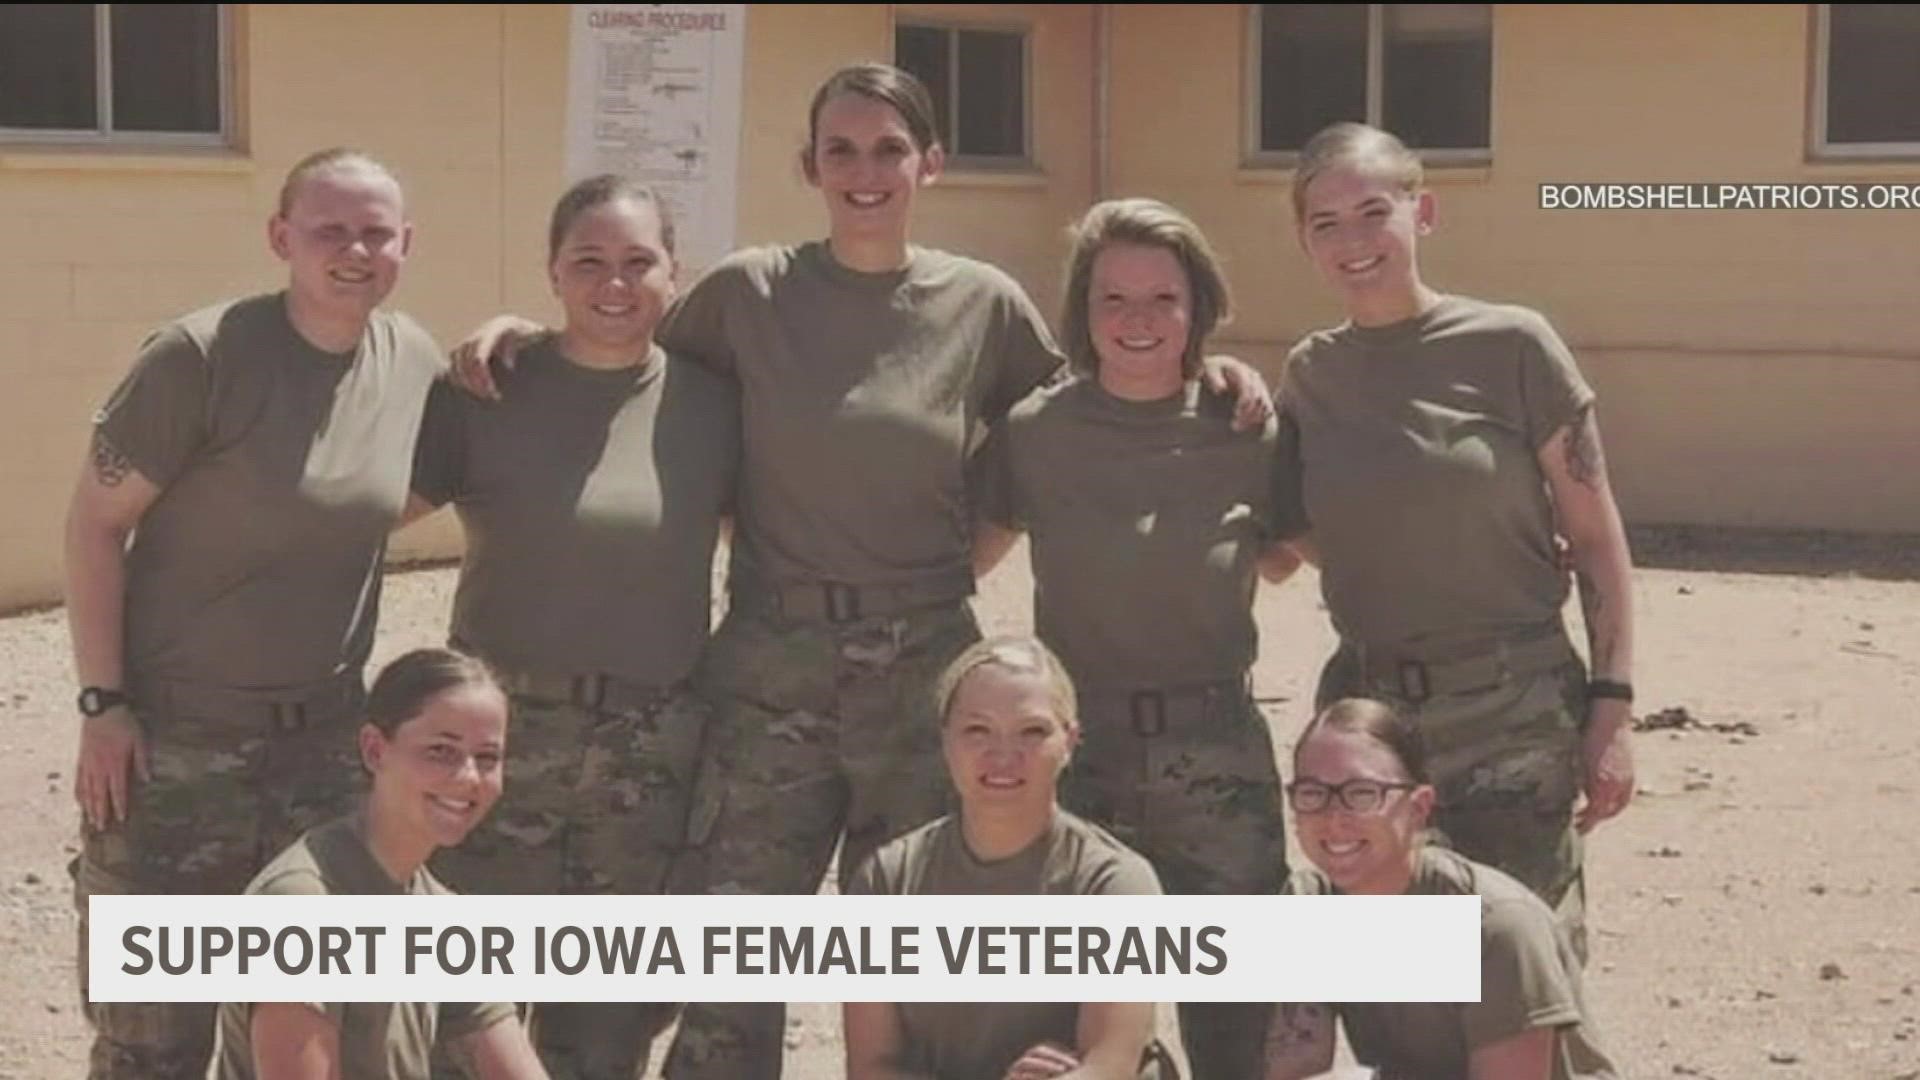 March is Women's History month and one person is using the occasion to highlight female troops and veterans.